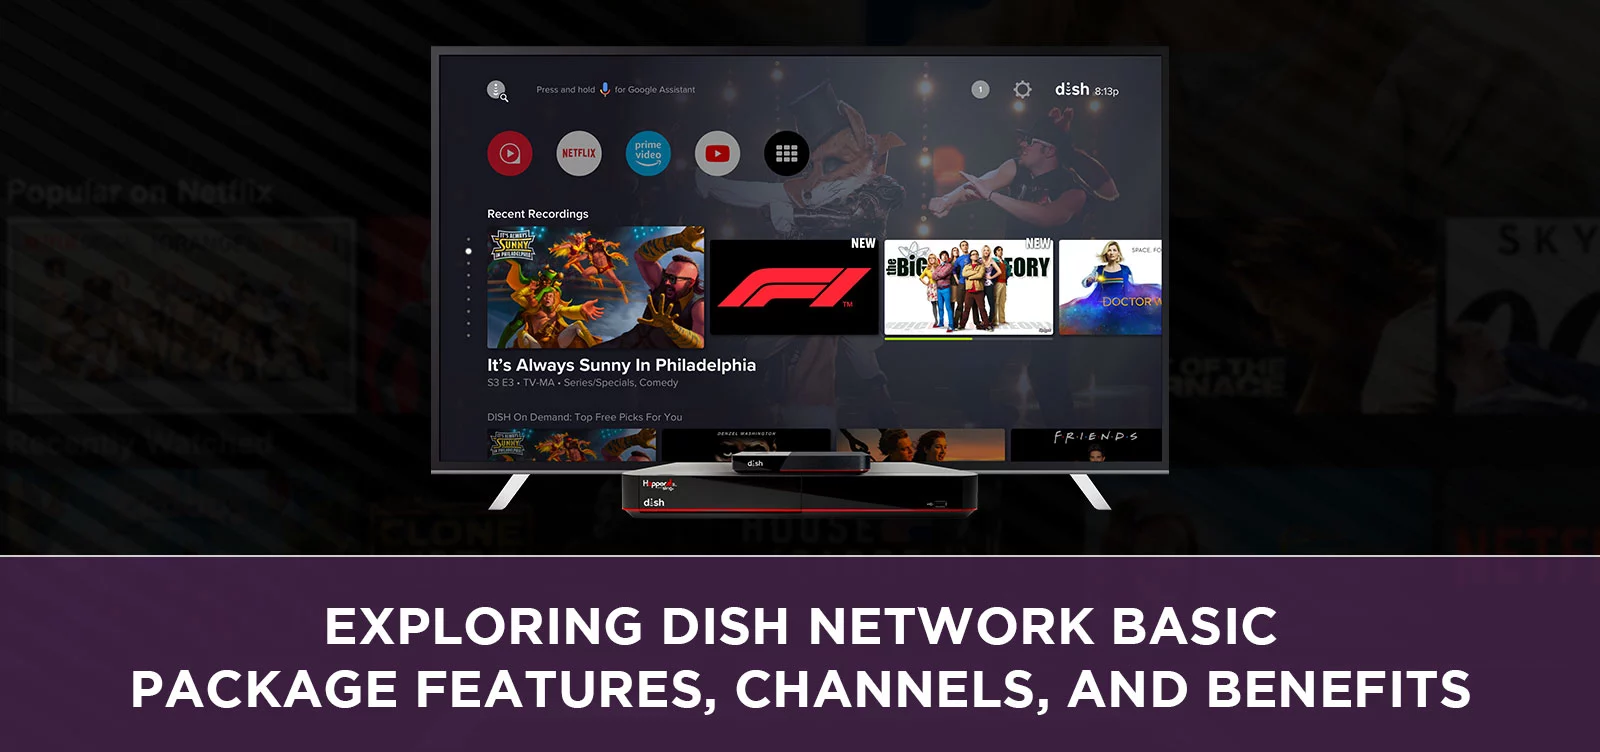 Exploring Dish Network Basic Package Features, Channels, and Benefits